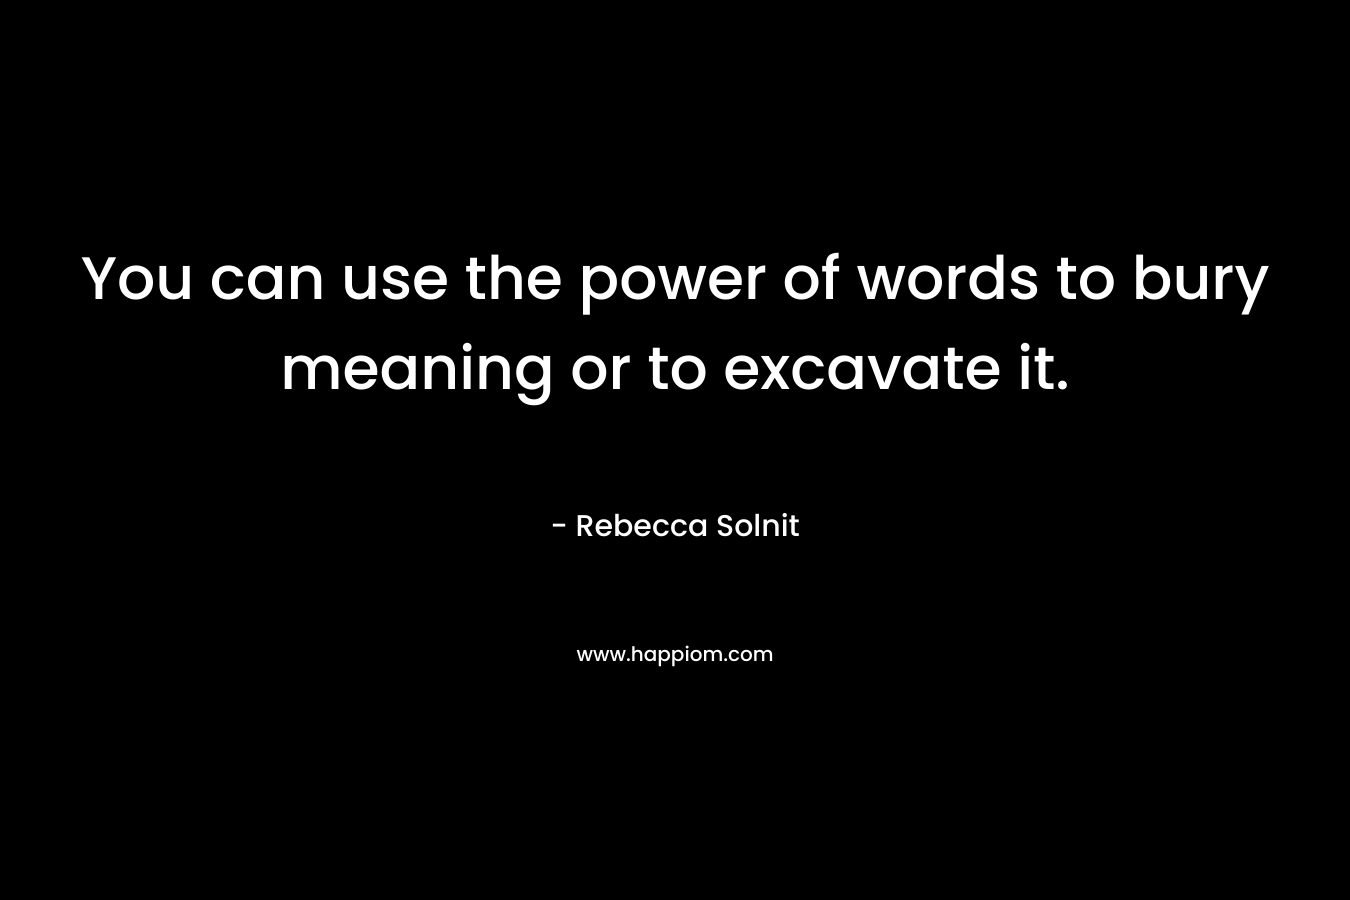 You can use the power of words to bury meaning or to excavate it. – Rebecca Solnit